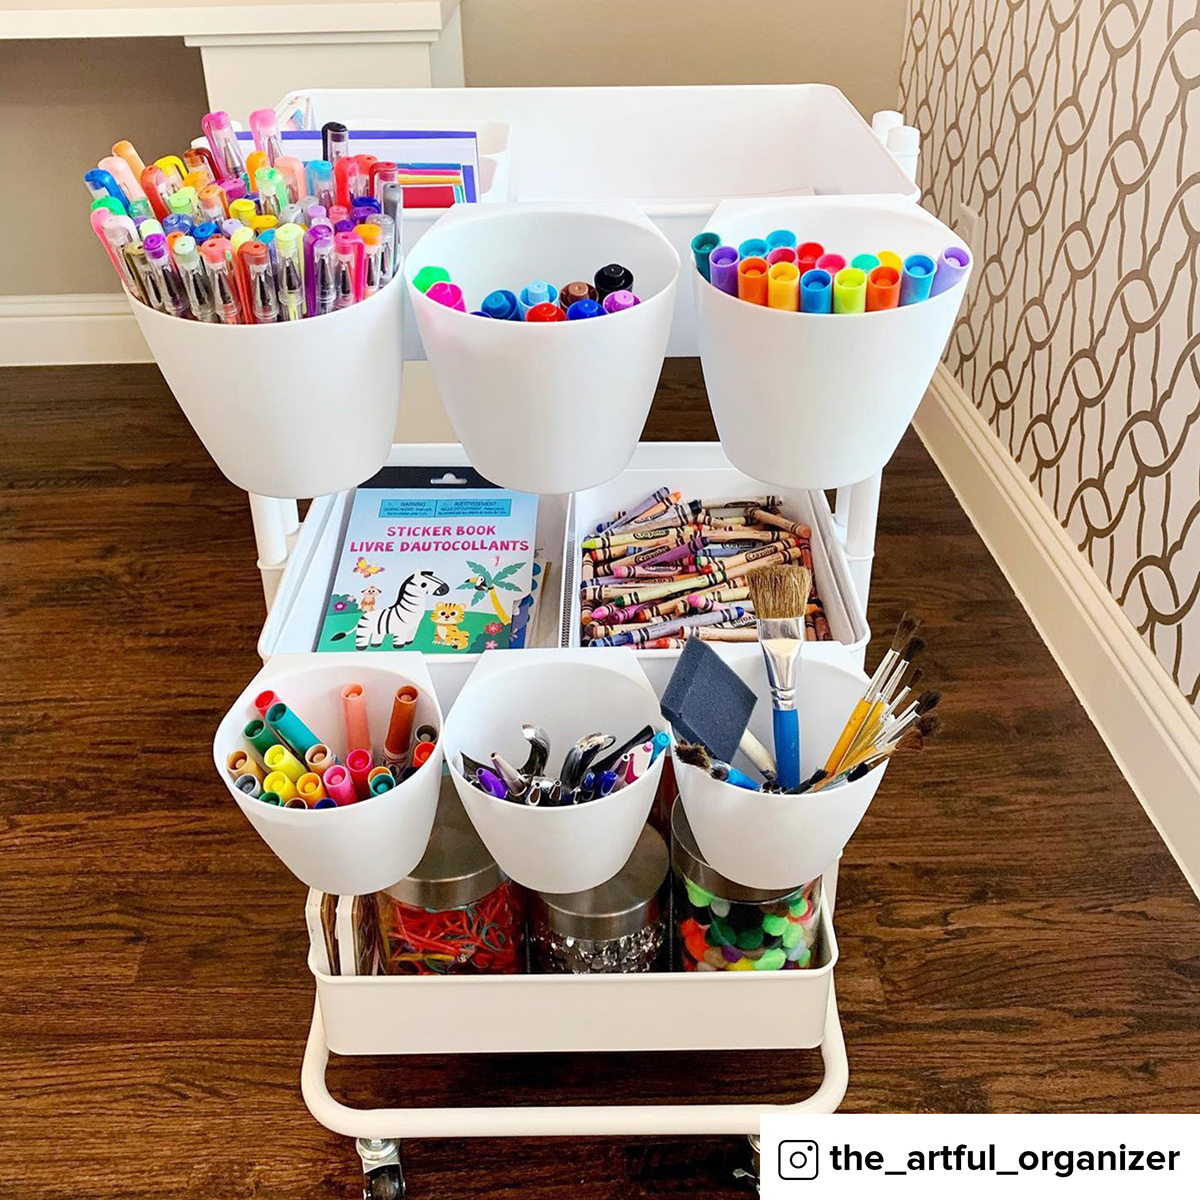 https://www.containerstore.com/catalogimages/416922/the_artful_organizer.jpg